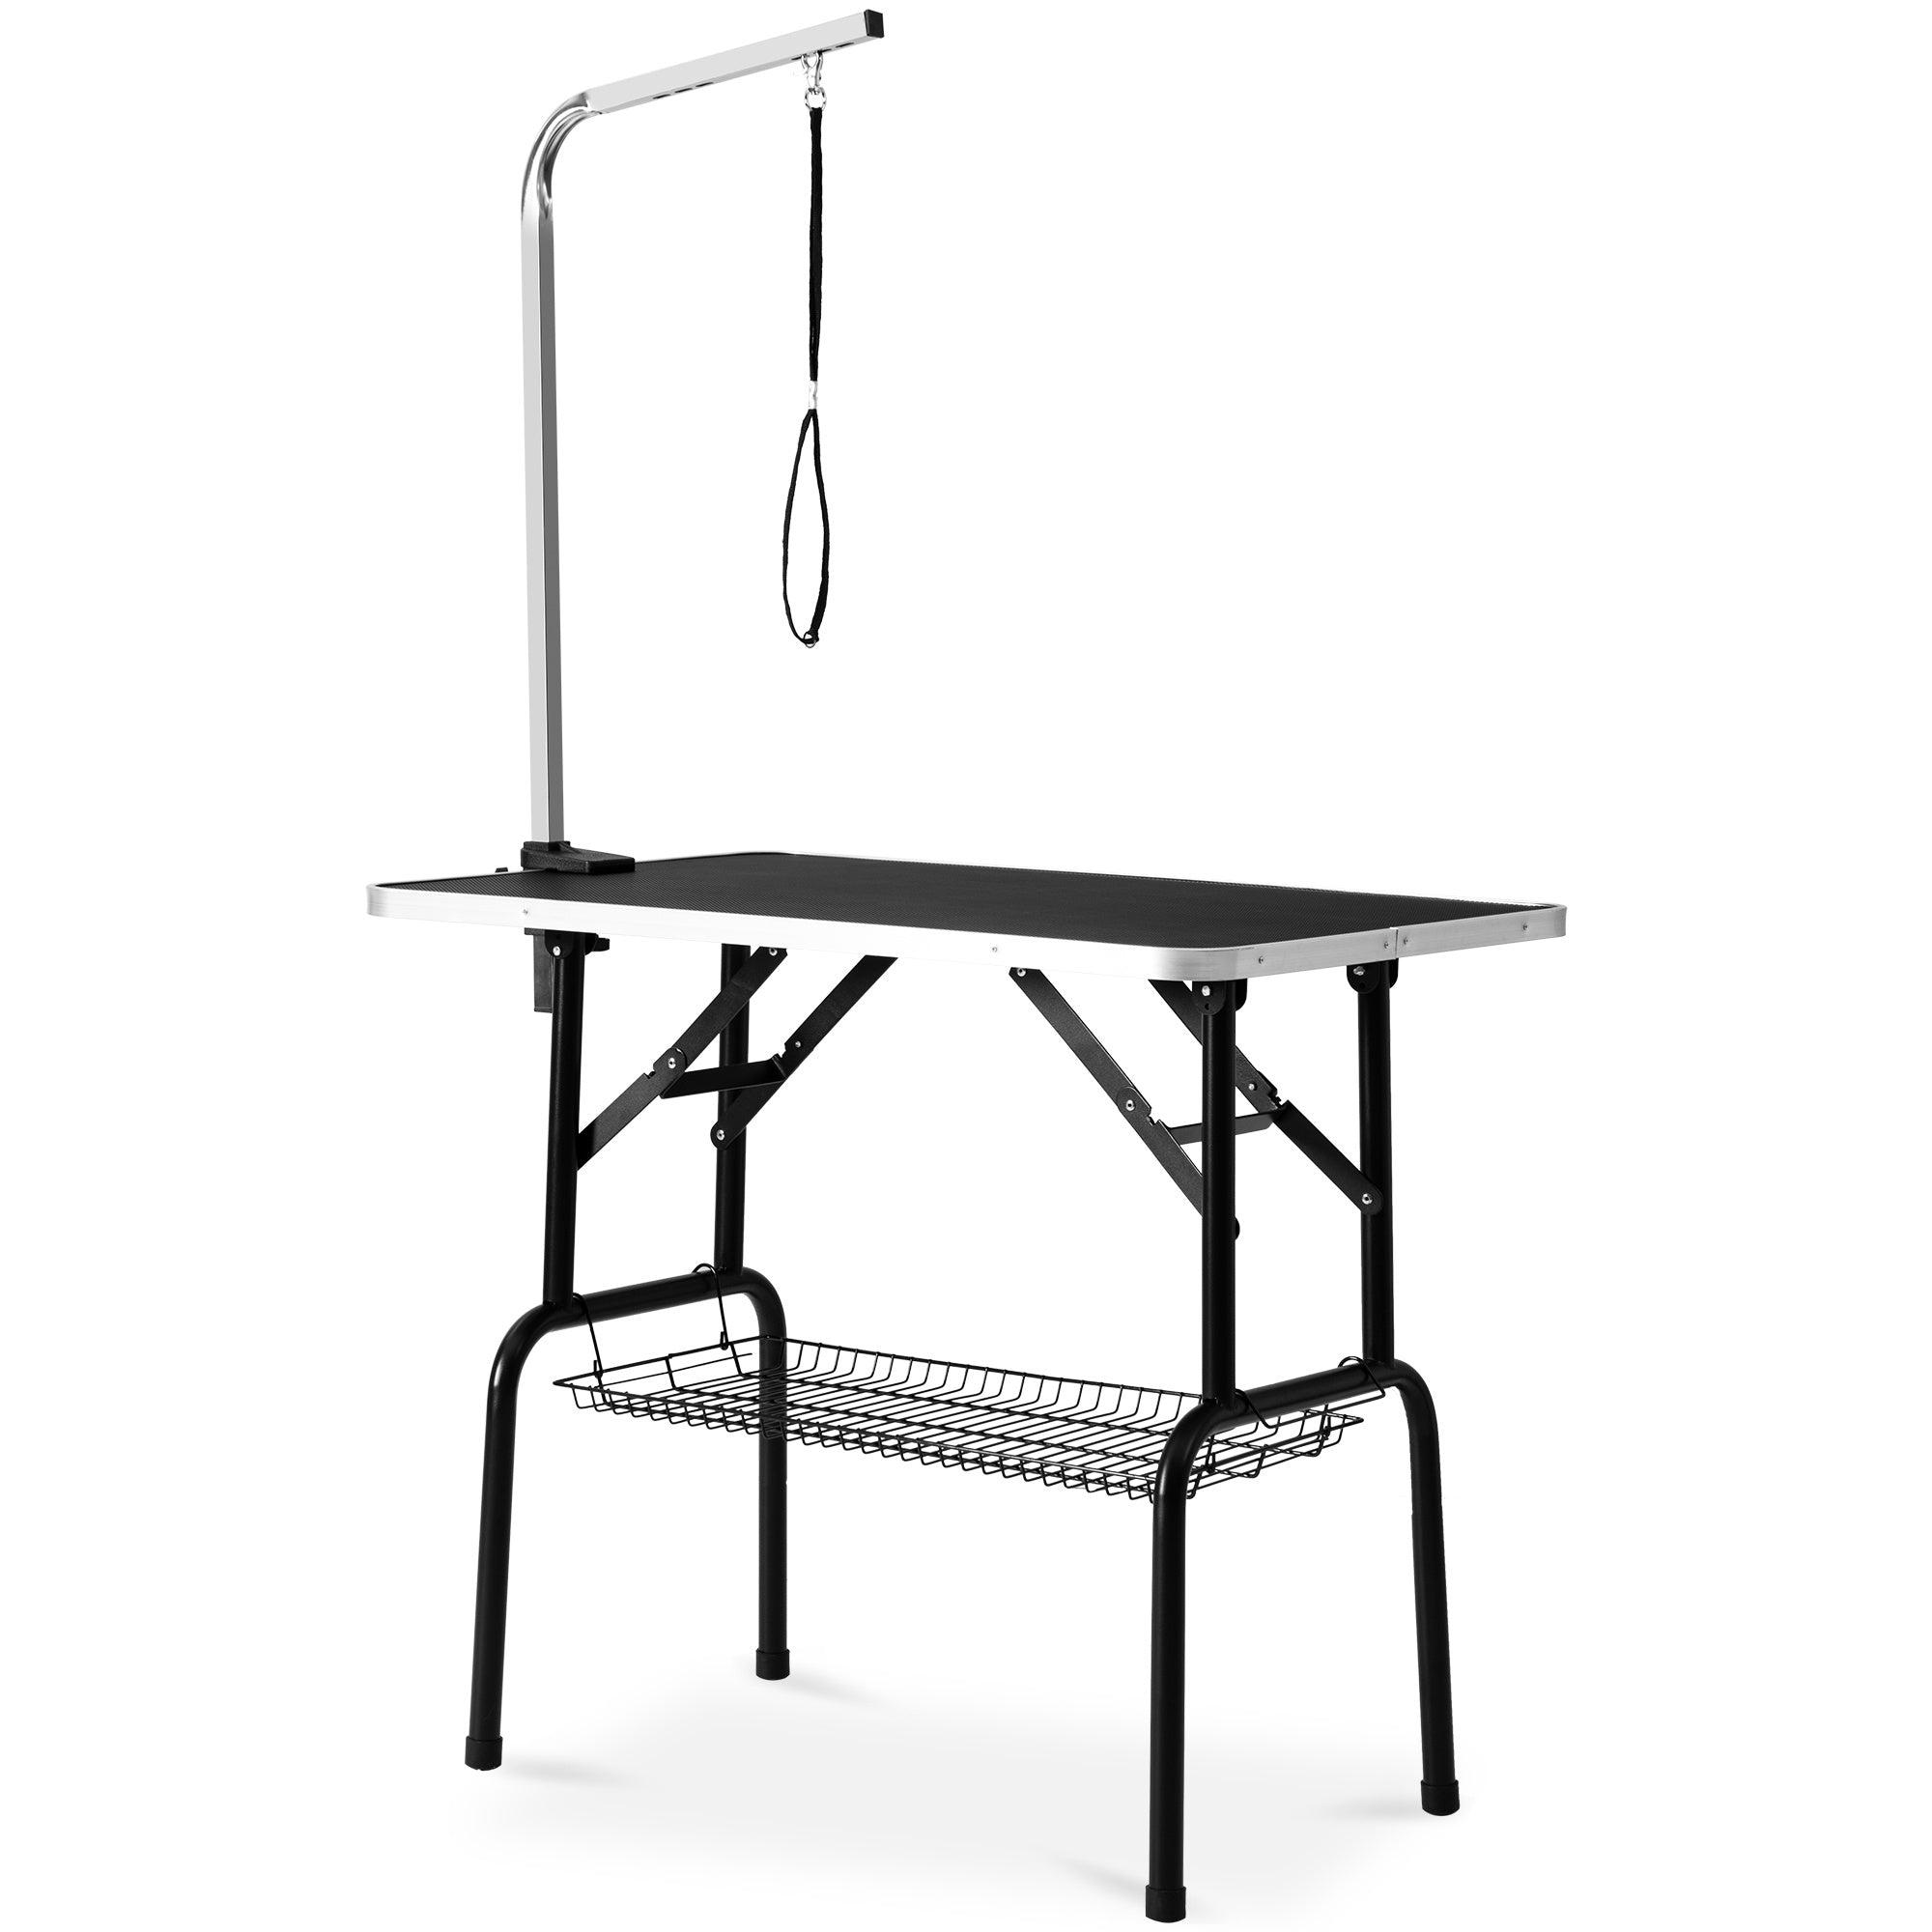 Free shipping Dog/cat grooming table adjustable height -32 "dry table with double loop/mesh tray, up to 220 LBS black